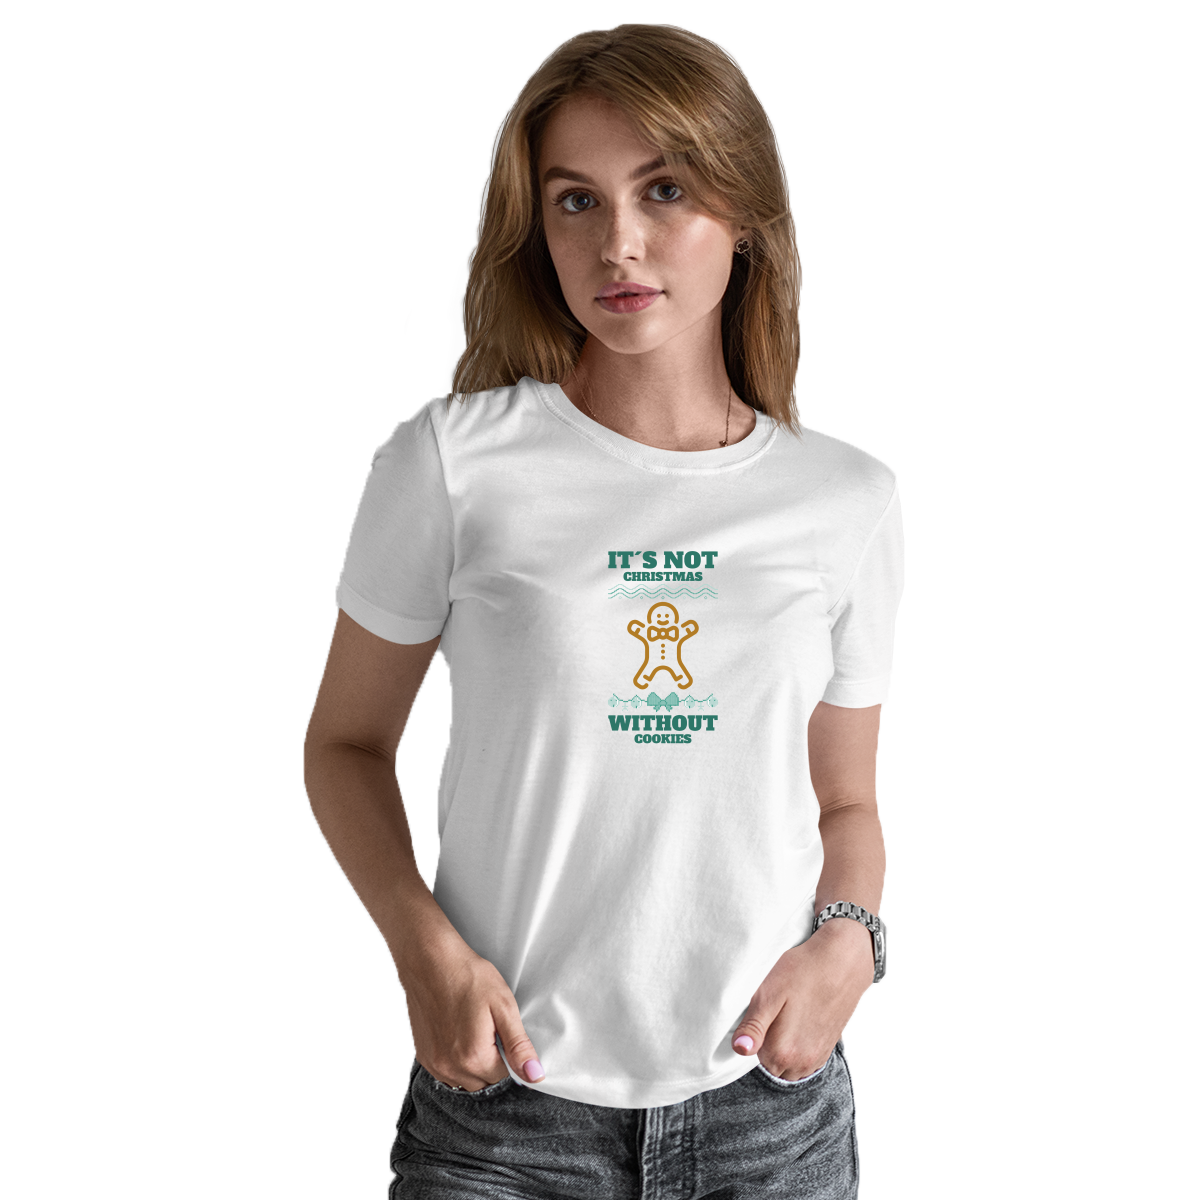 It's Not Christmas Without Cookies Women's T-shirt | White